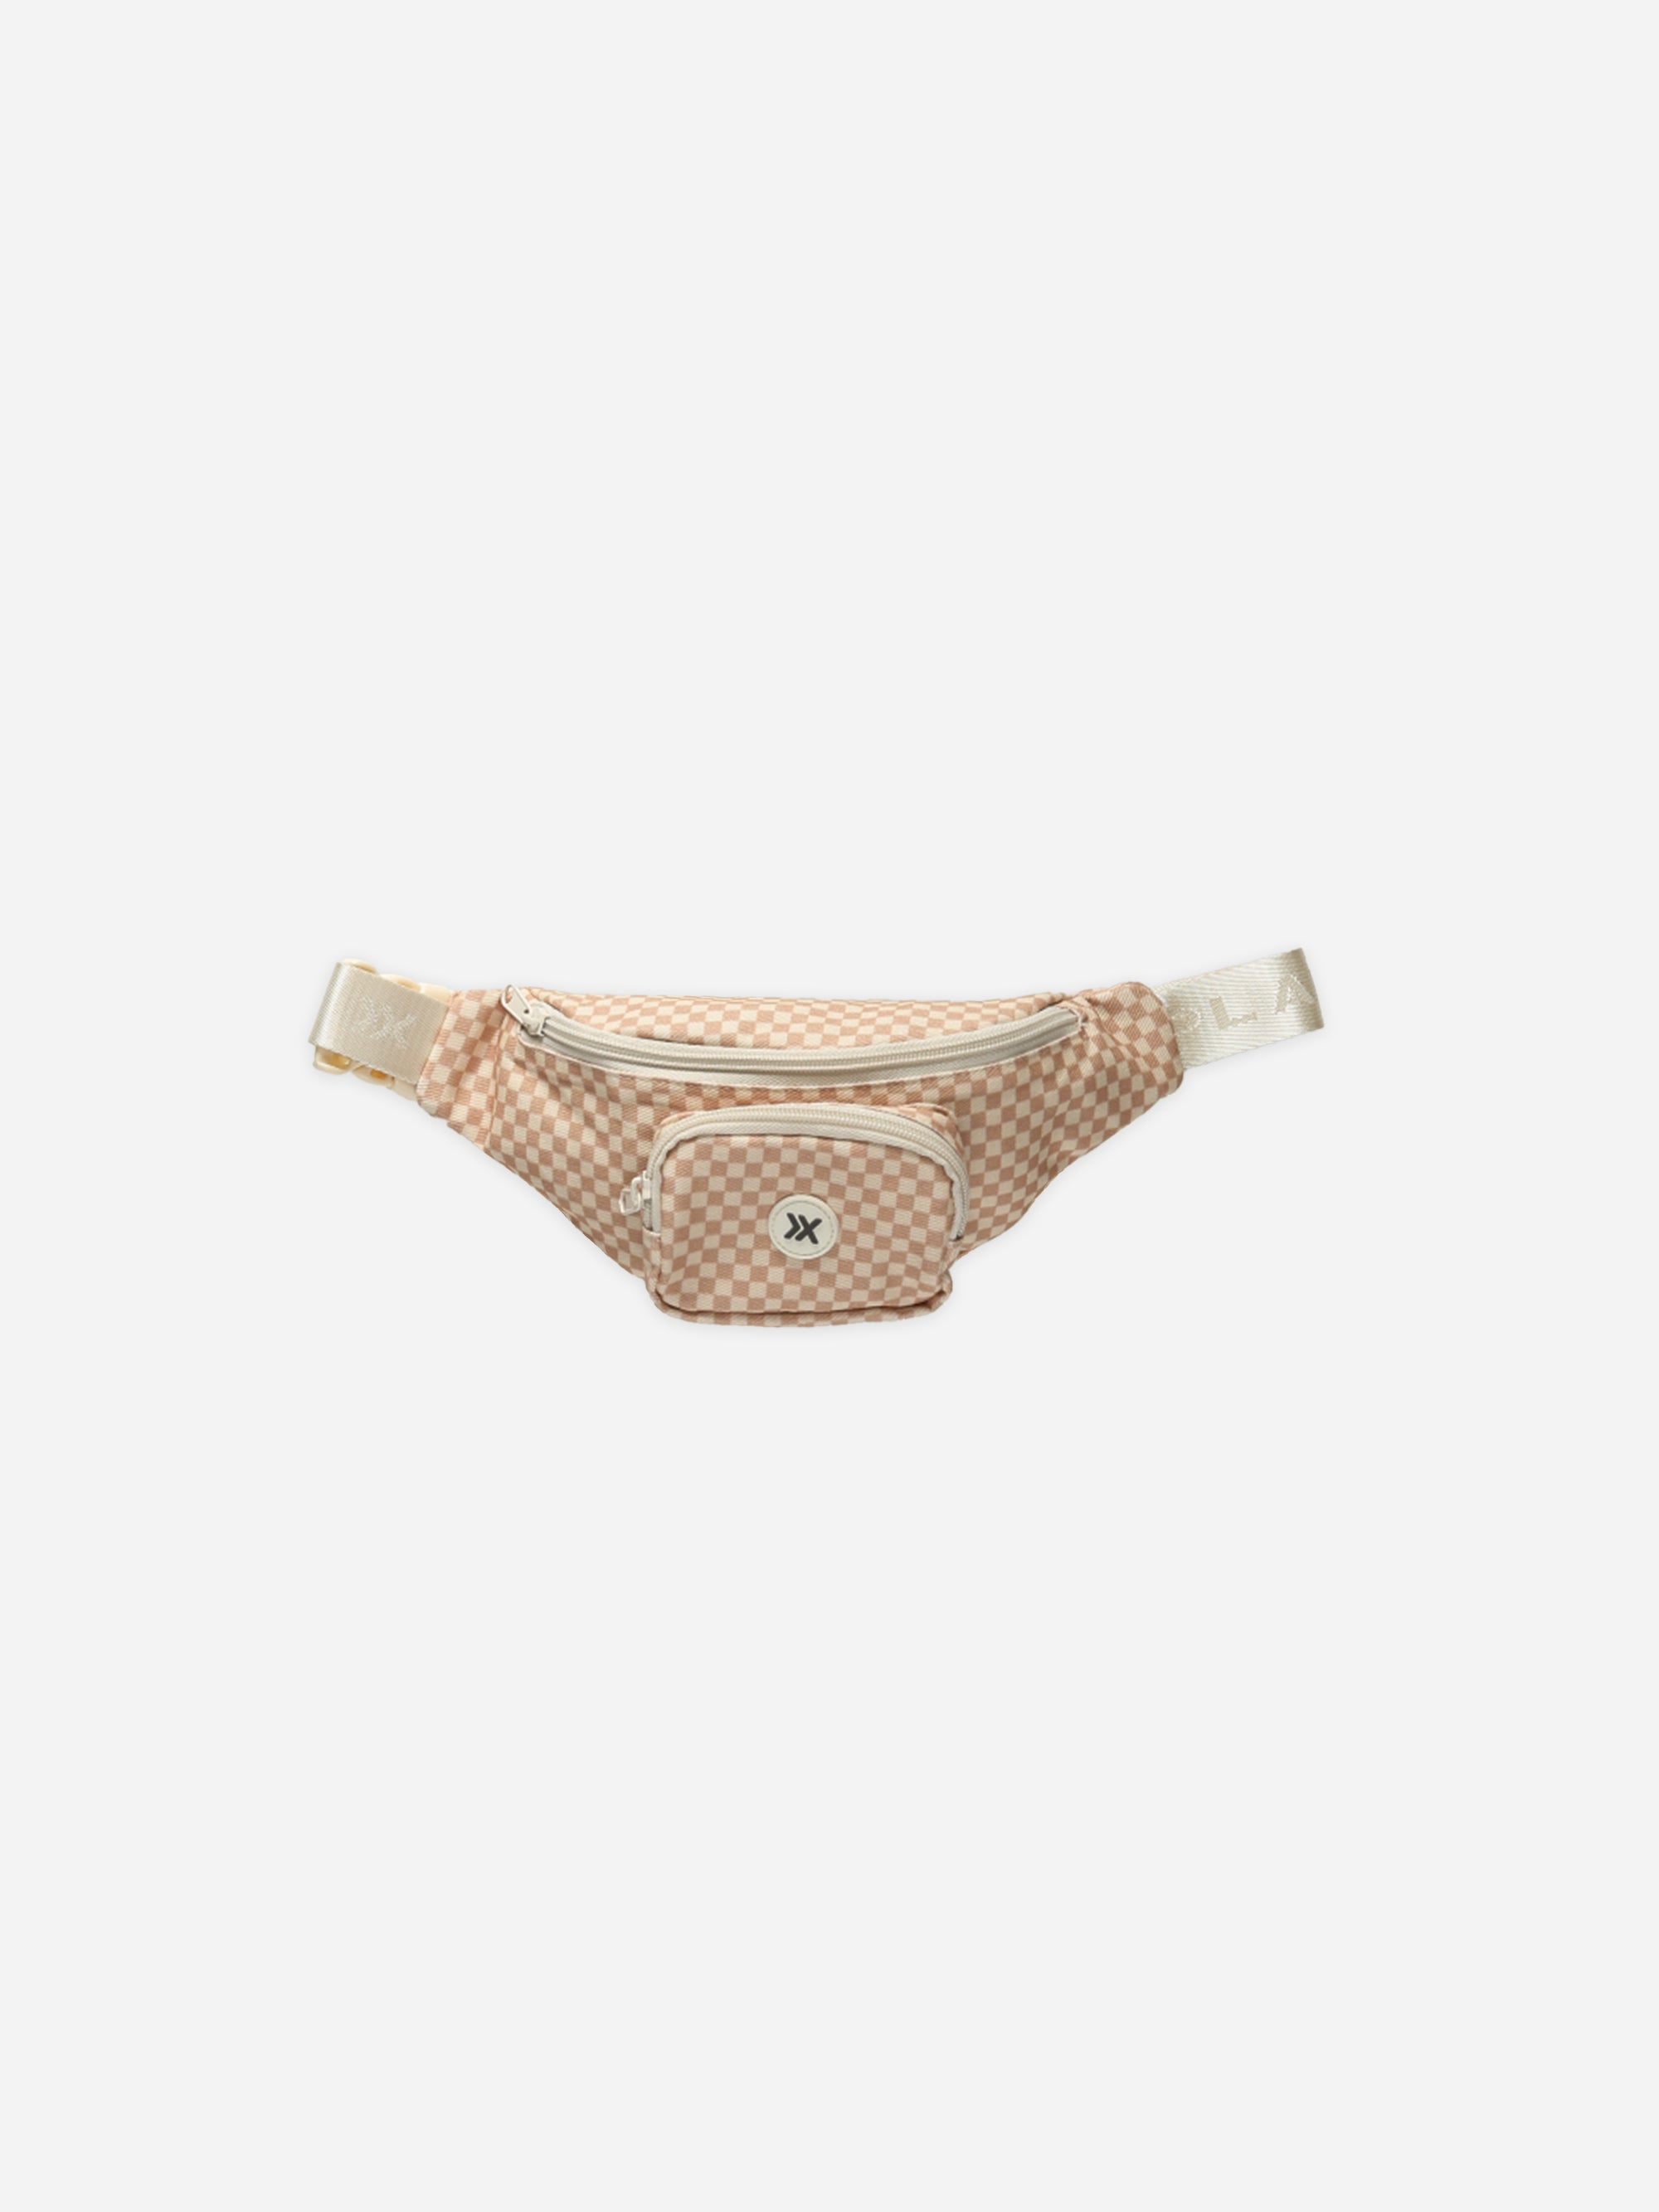 Fanny Pack || Clay Micro Check - Rylee + Cru | Kids Clothes | Trendy Baby Clothes | Modern Infant Outfits |